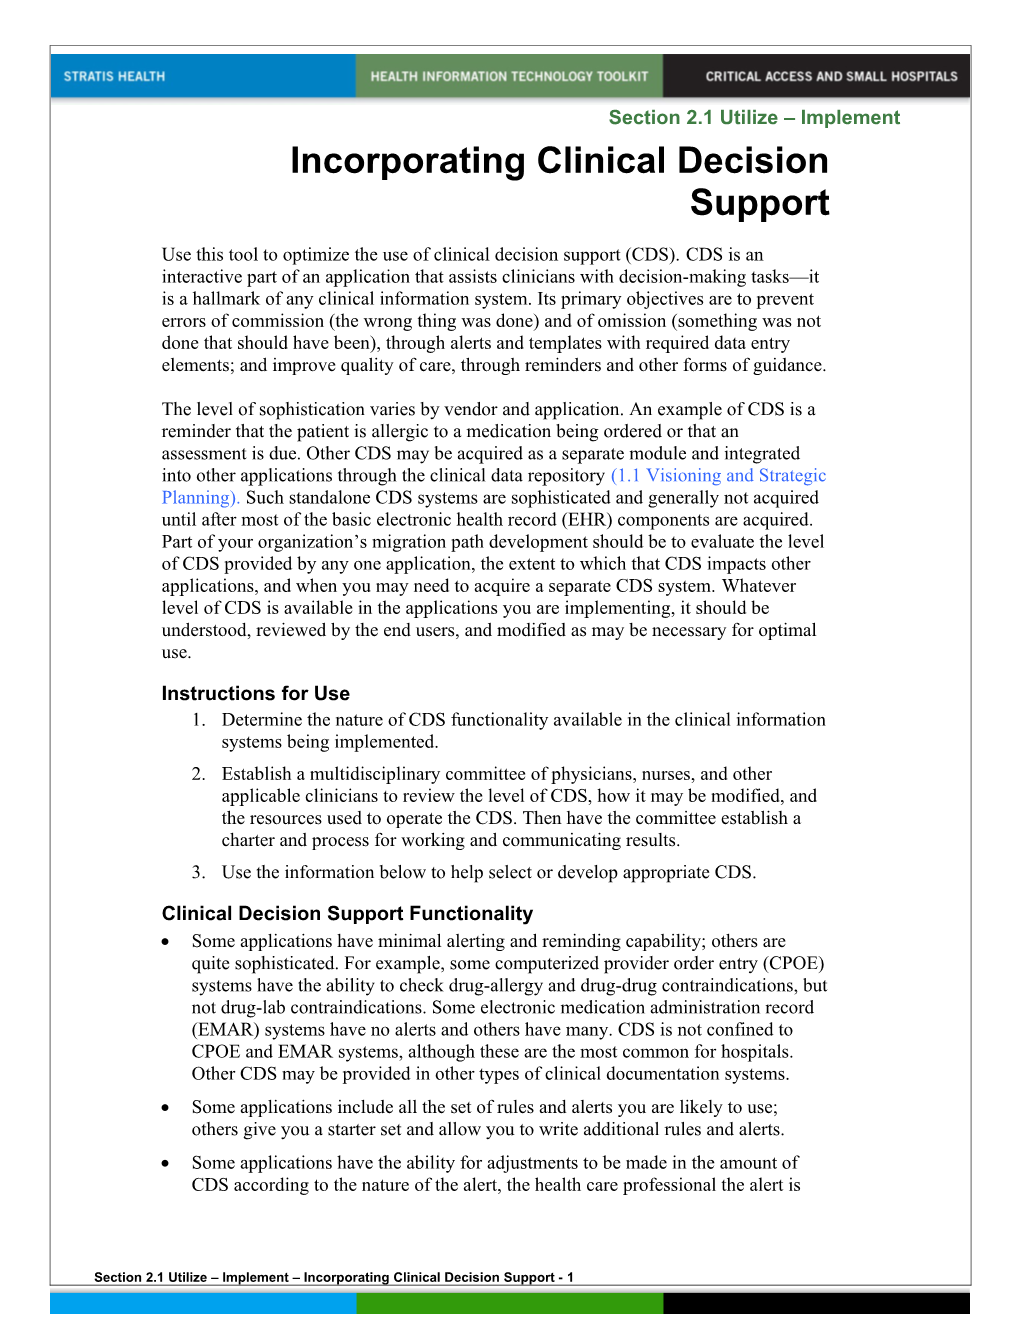 Incorporating Clinical Decision Support